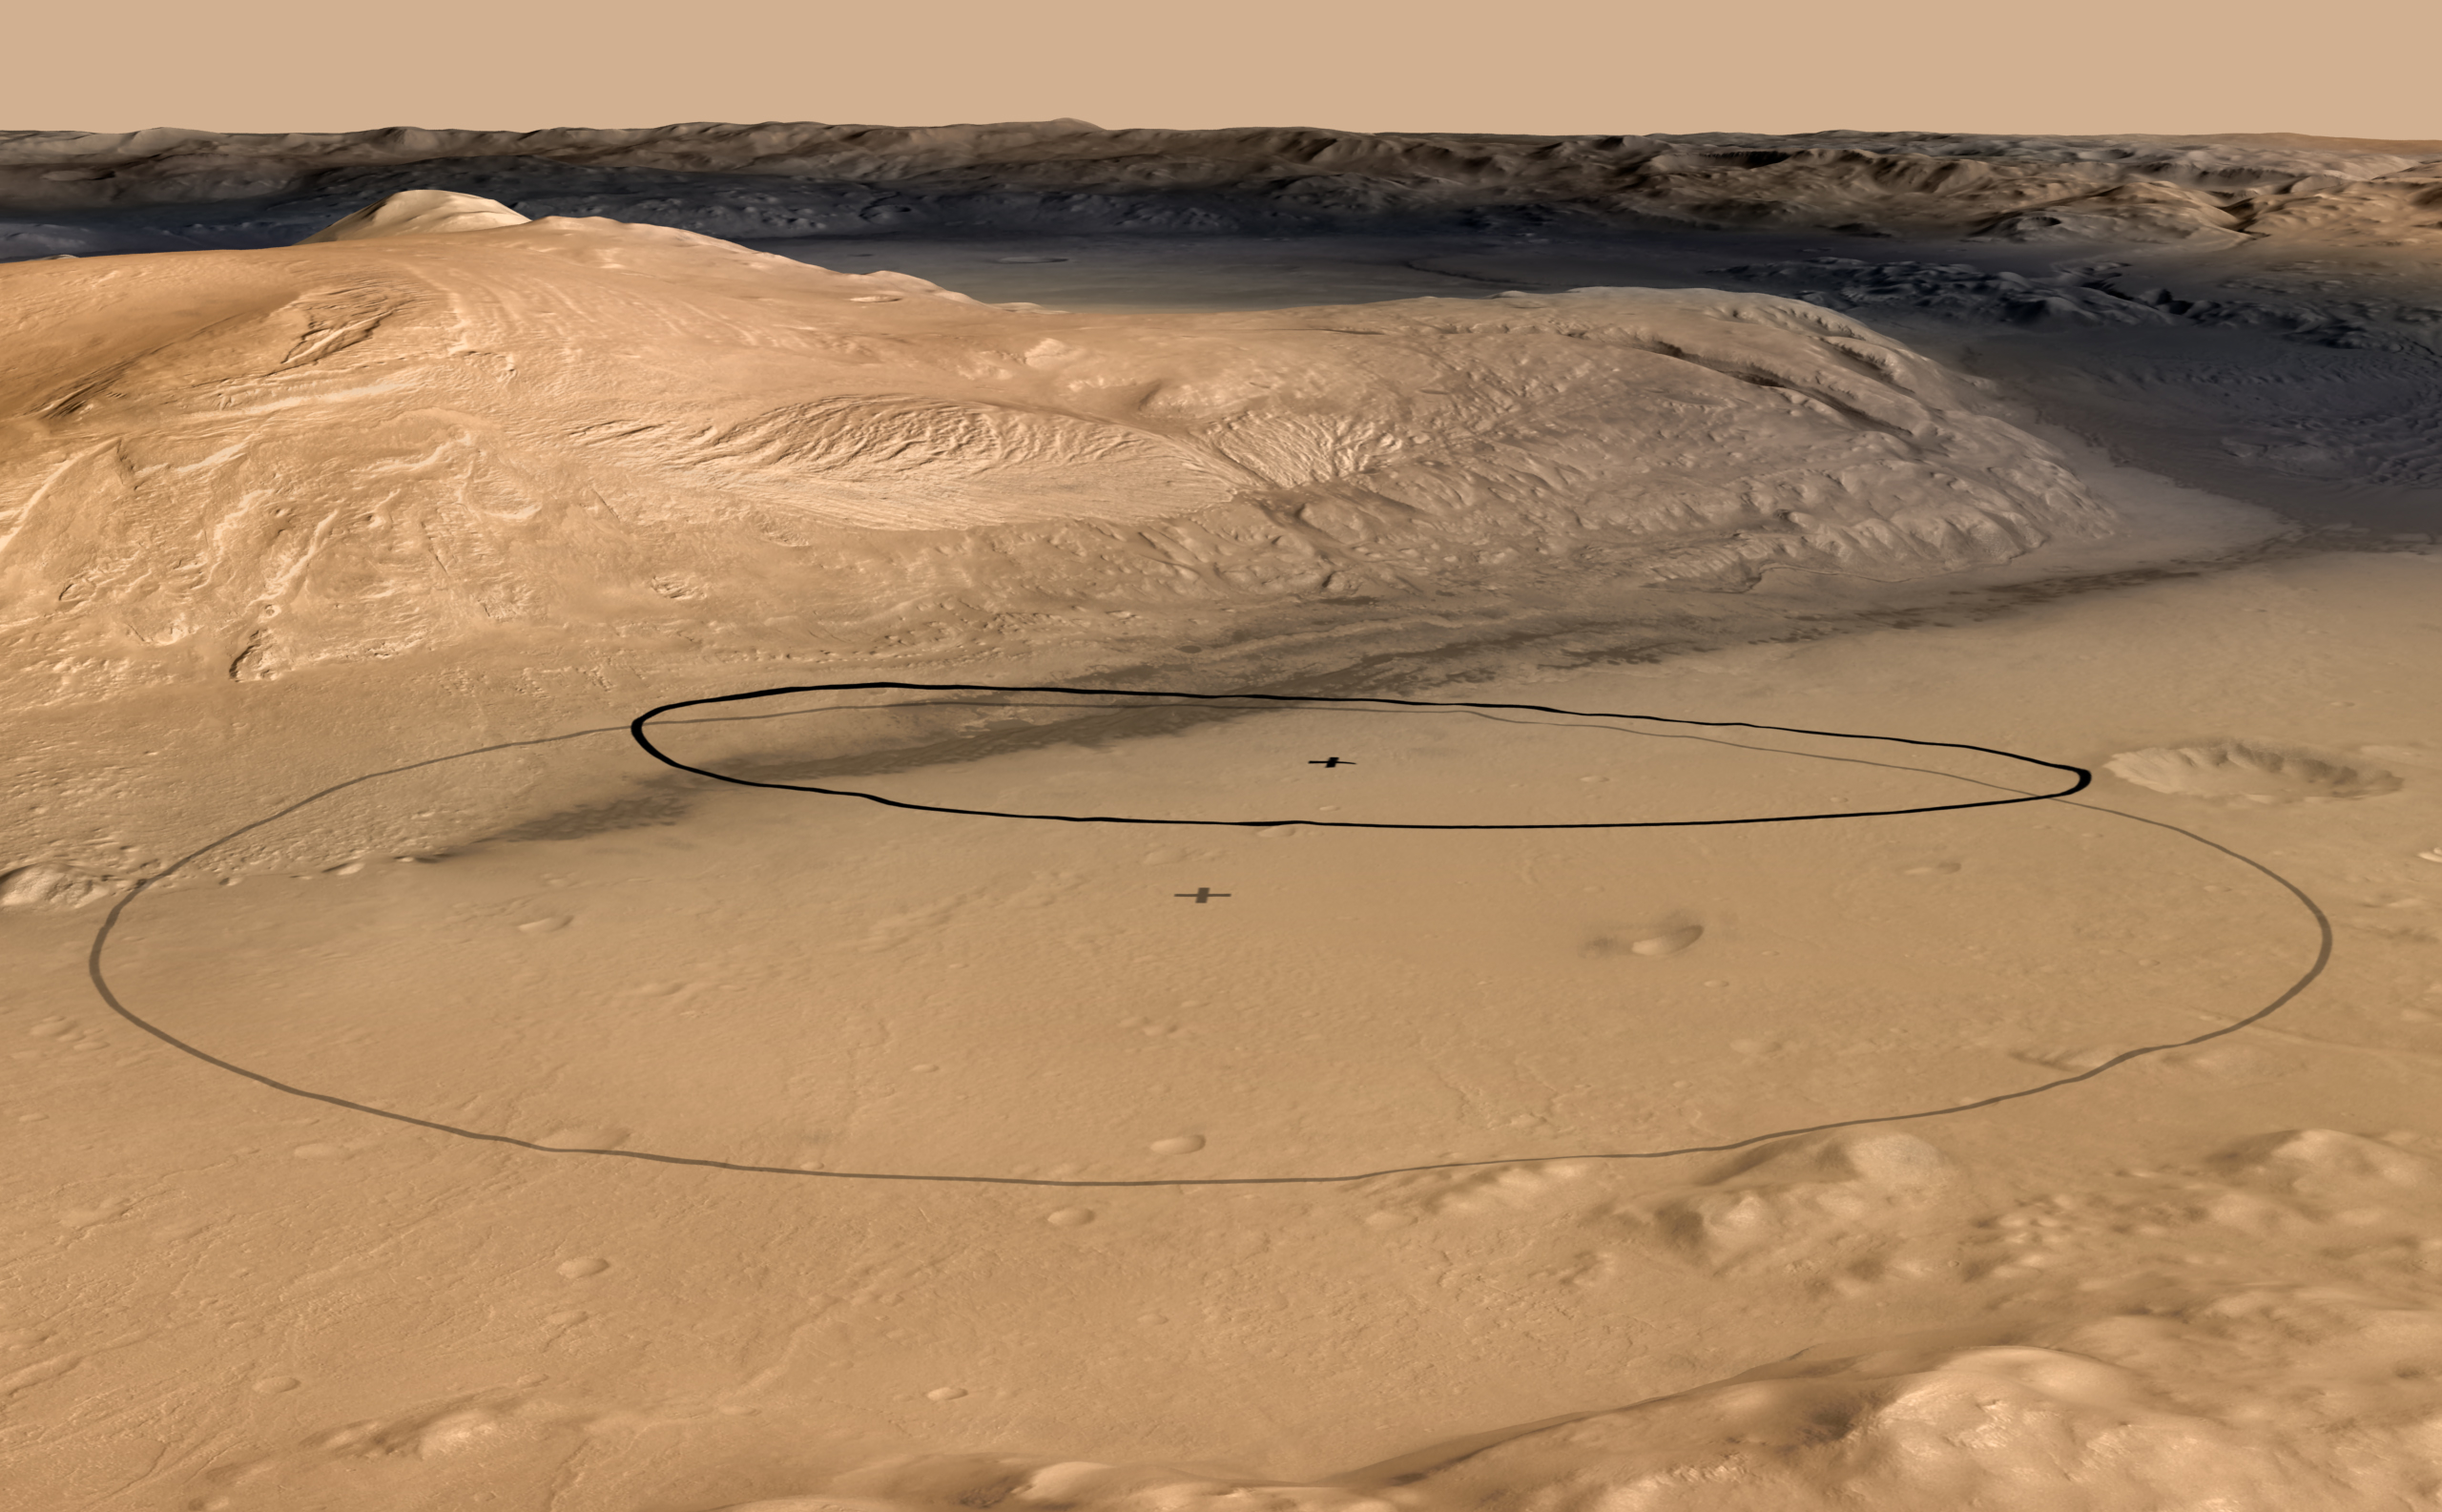 This image shows changes in the target landing area for Curiosity, the rover of NASA's Mars Science Laboratory project.